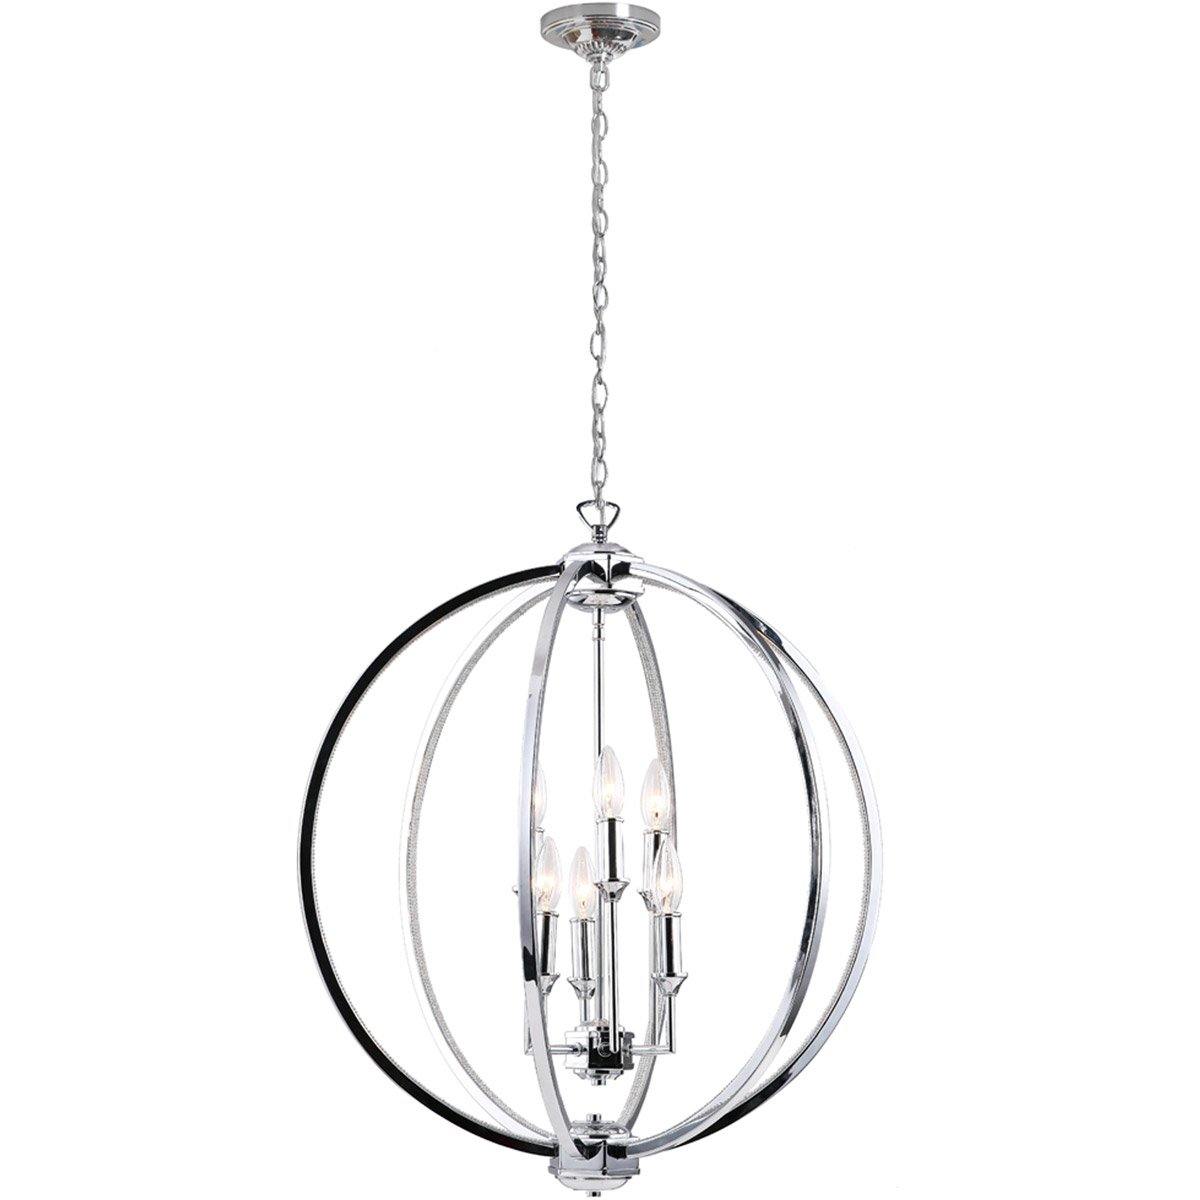 Polished Chrome with Orb Ring Chandelier - LV LIGHTING